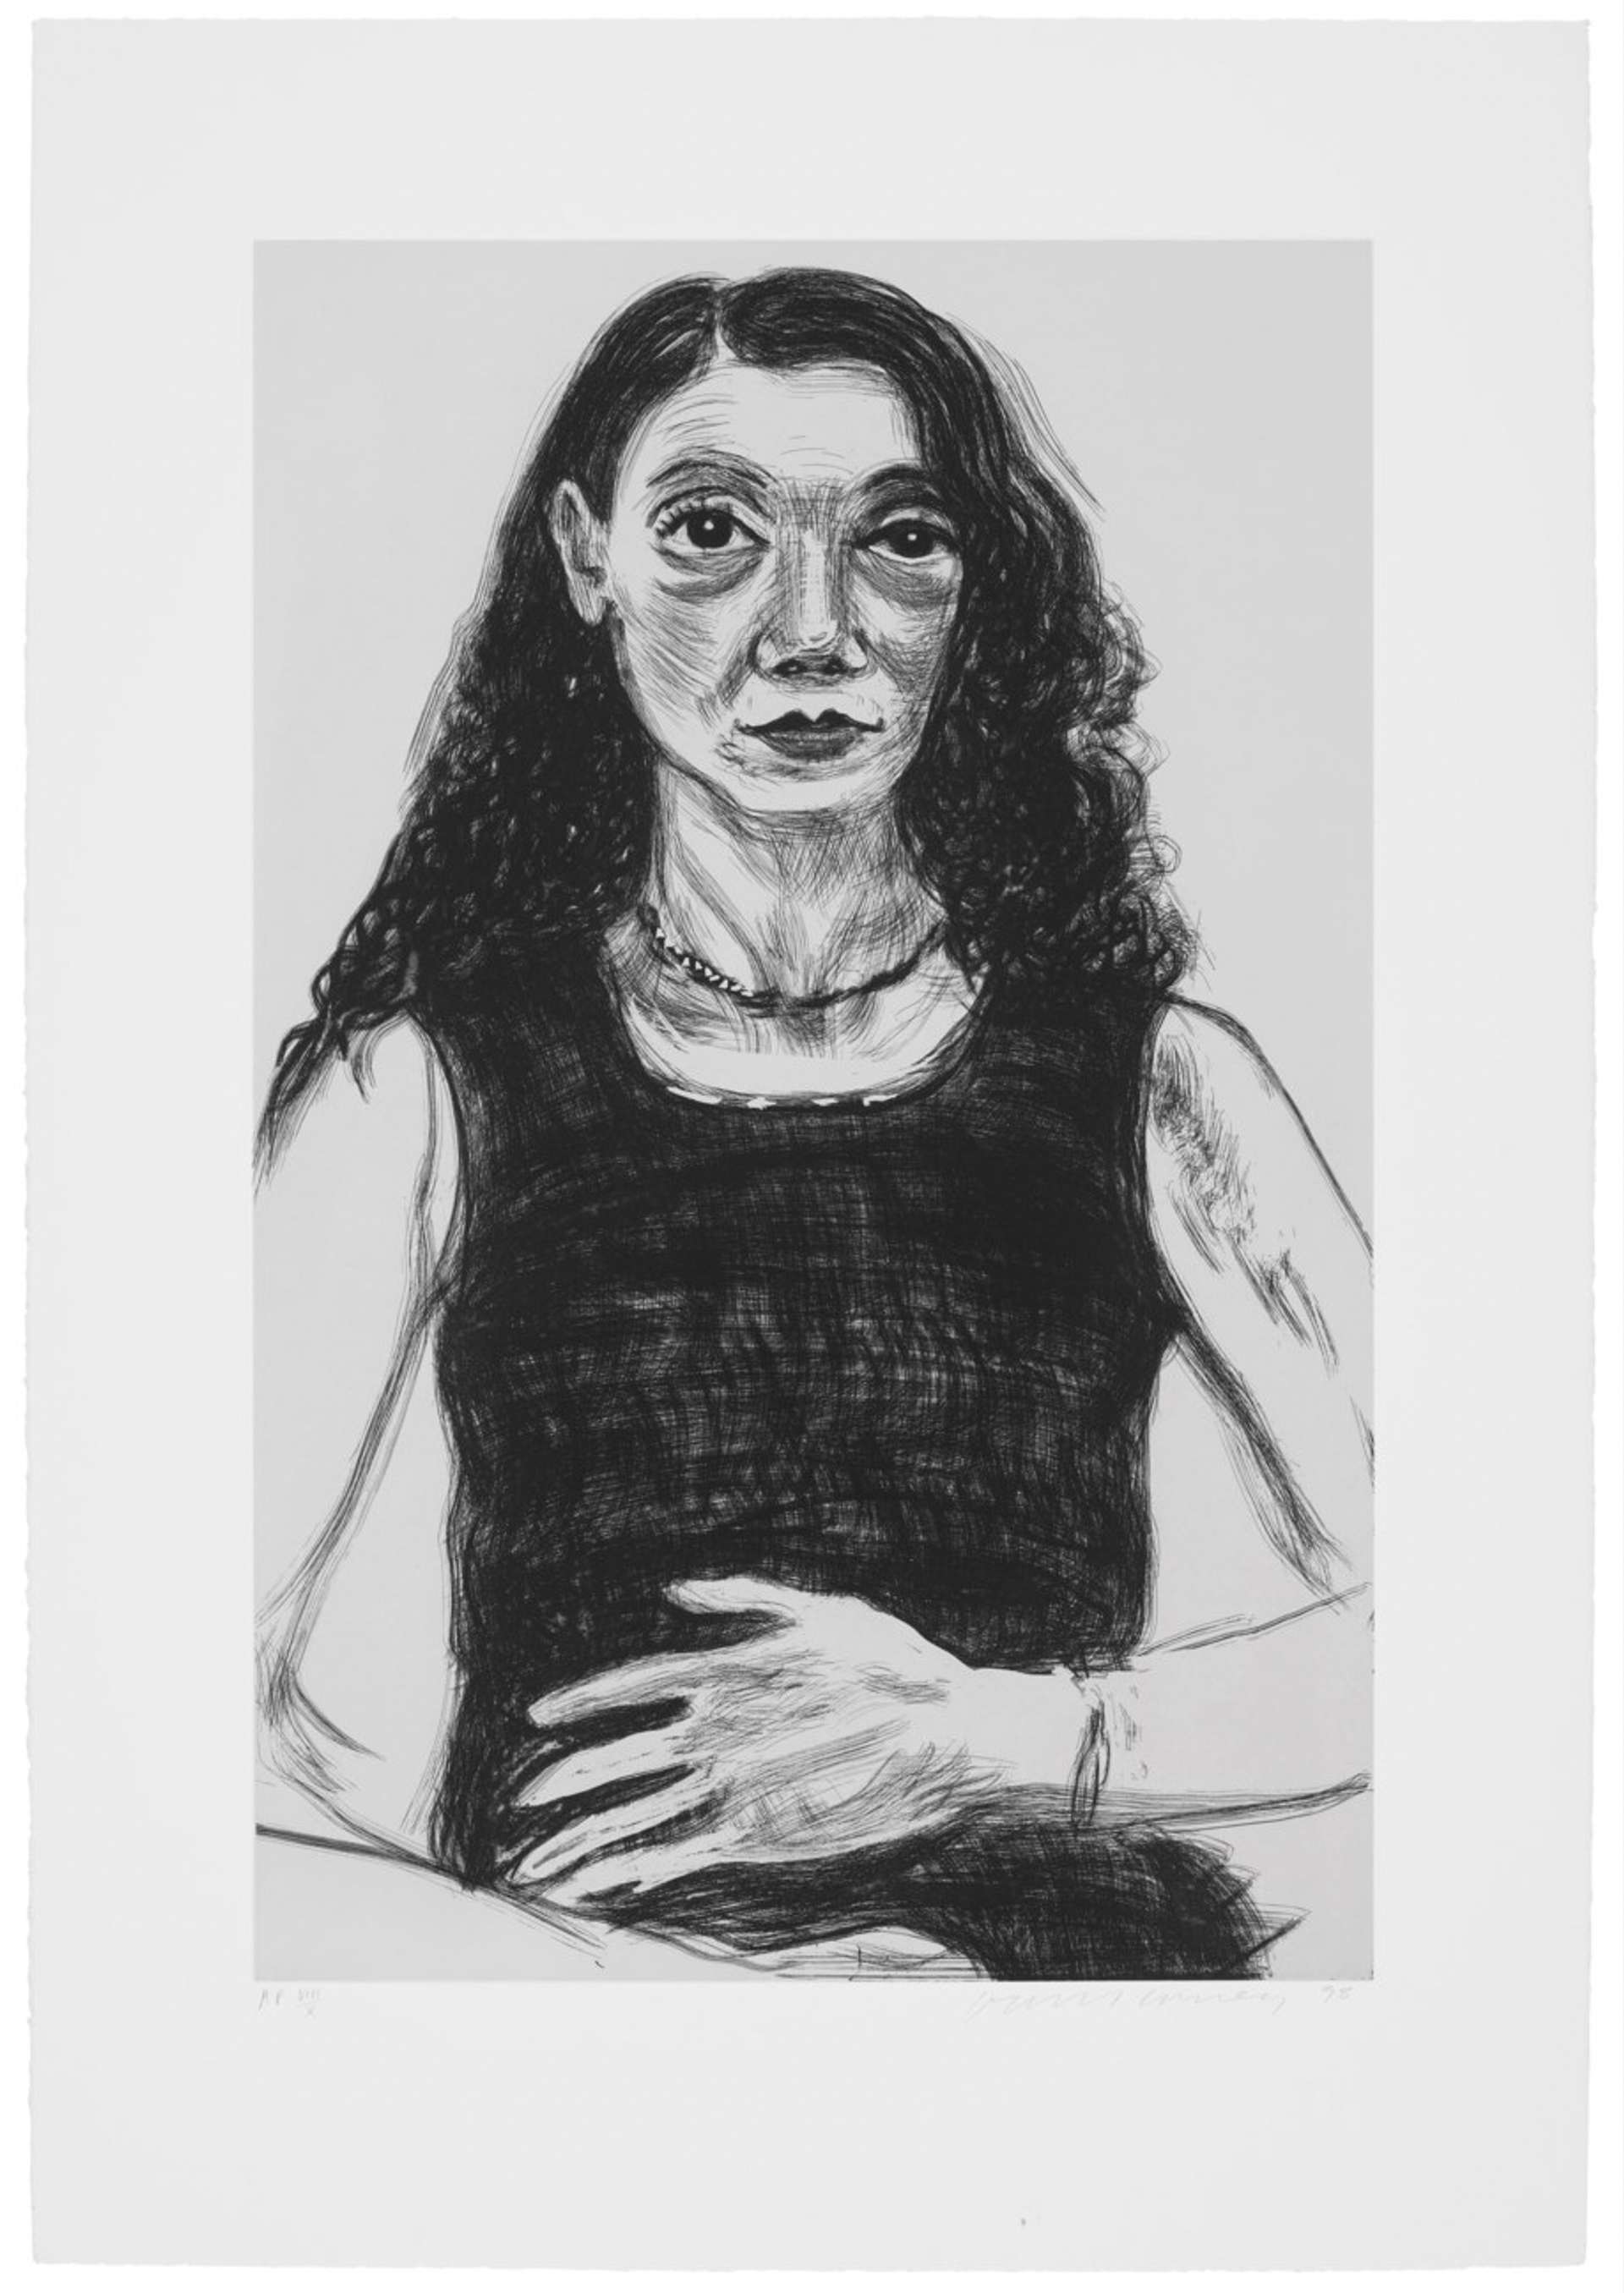 An etching by David Hockney depicting a woman with long curly hair staring out the picture plane beyond the viewer.